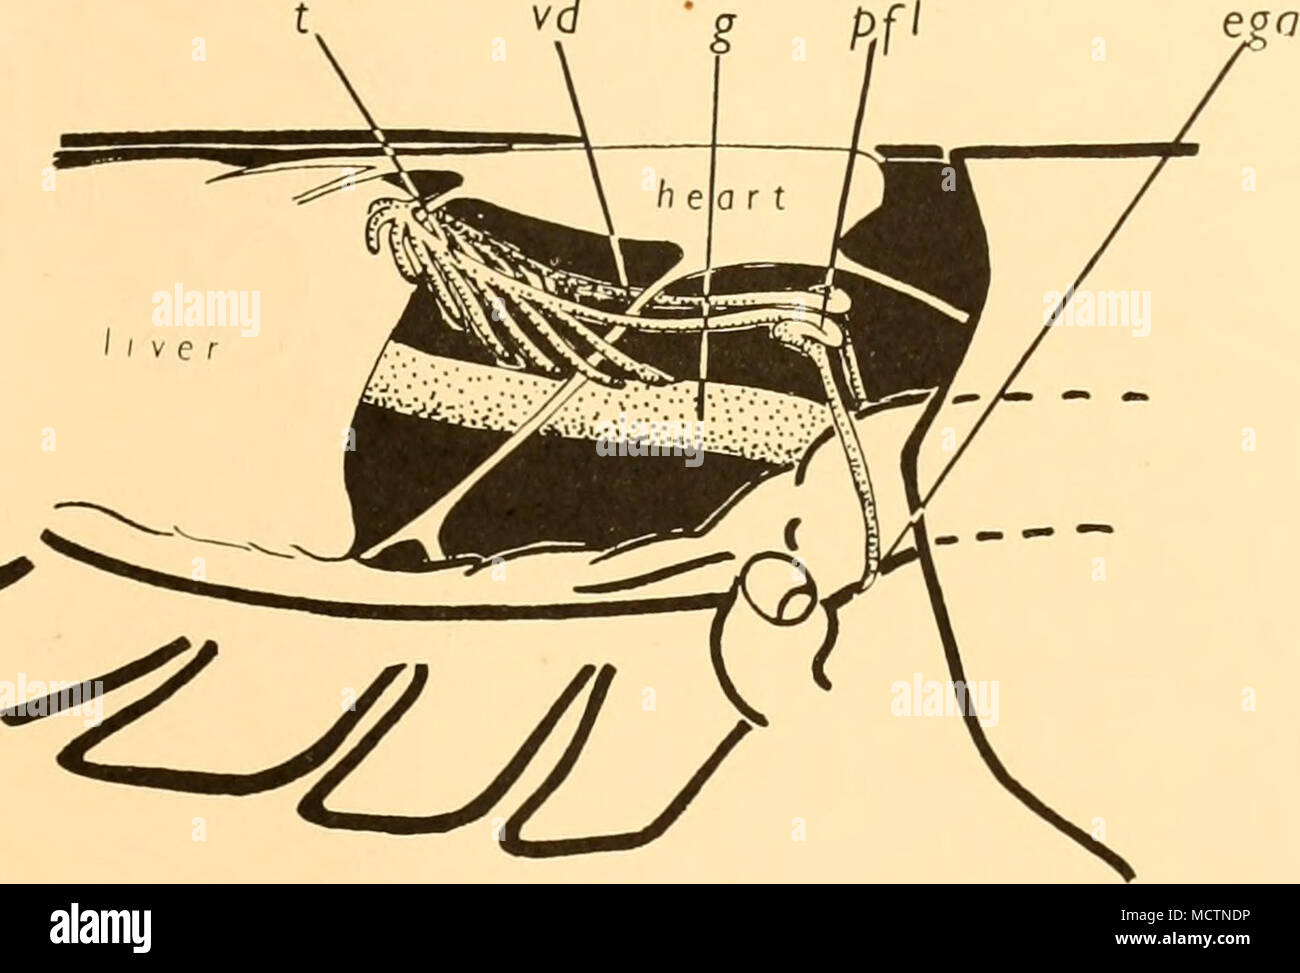 . Fig. 2. Dissection to show the development of the male reproductive system. â ' 15. ega, external genital aperture; g, gut; pfi, posterior flexure; t, testis; vd, vas deferens. as its posterior margin. At this point, each duct bends outwards at right angles, runs between the musculature of the body wall and the carapace, and passes laterally and ventrally behind the luminous organ, to open on the sternum of the eighth thoracic segment near the middle line. The vasa deferentia are slightly dilated immediately behind the external genital apertures ega (Fig. 2). As can be seen from the diagrams Stock Photo